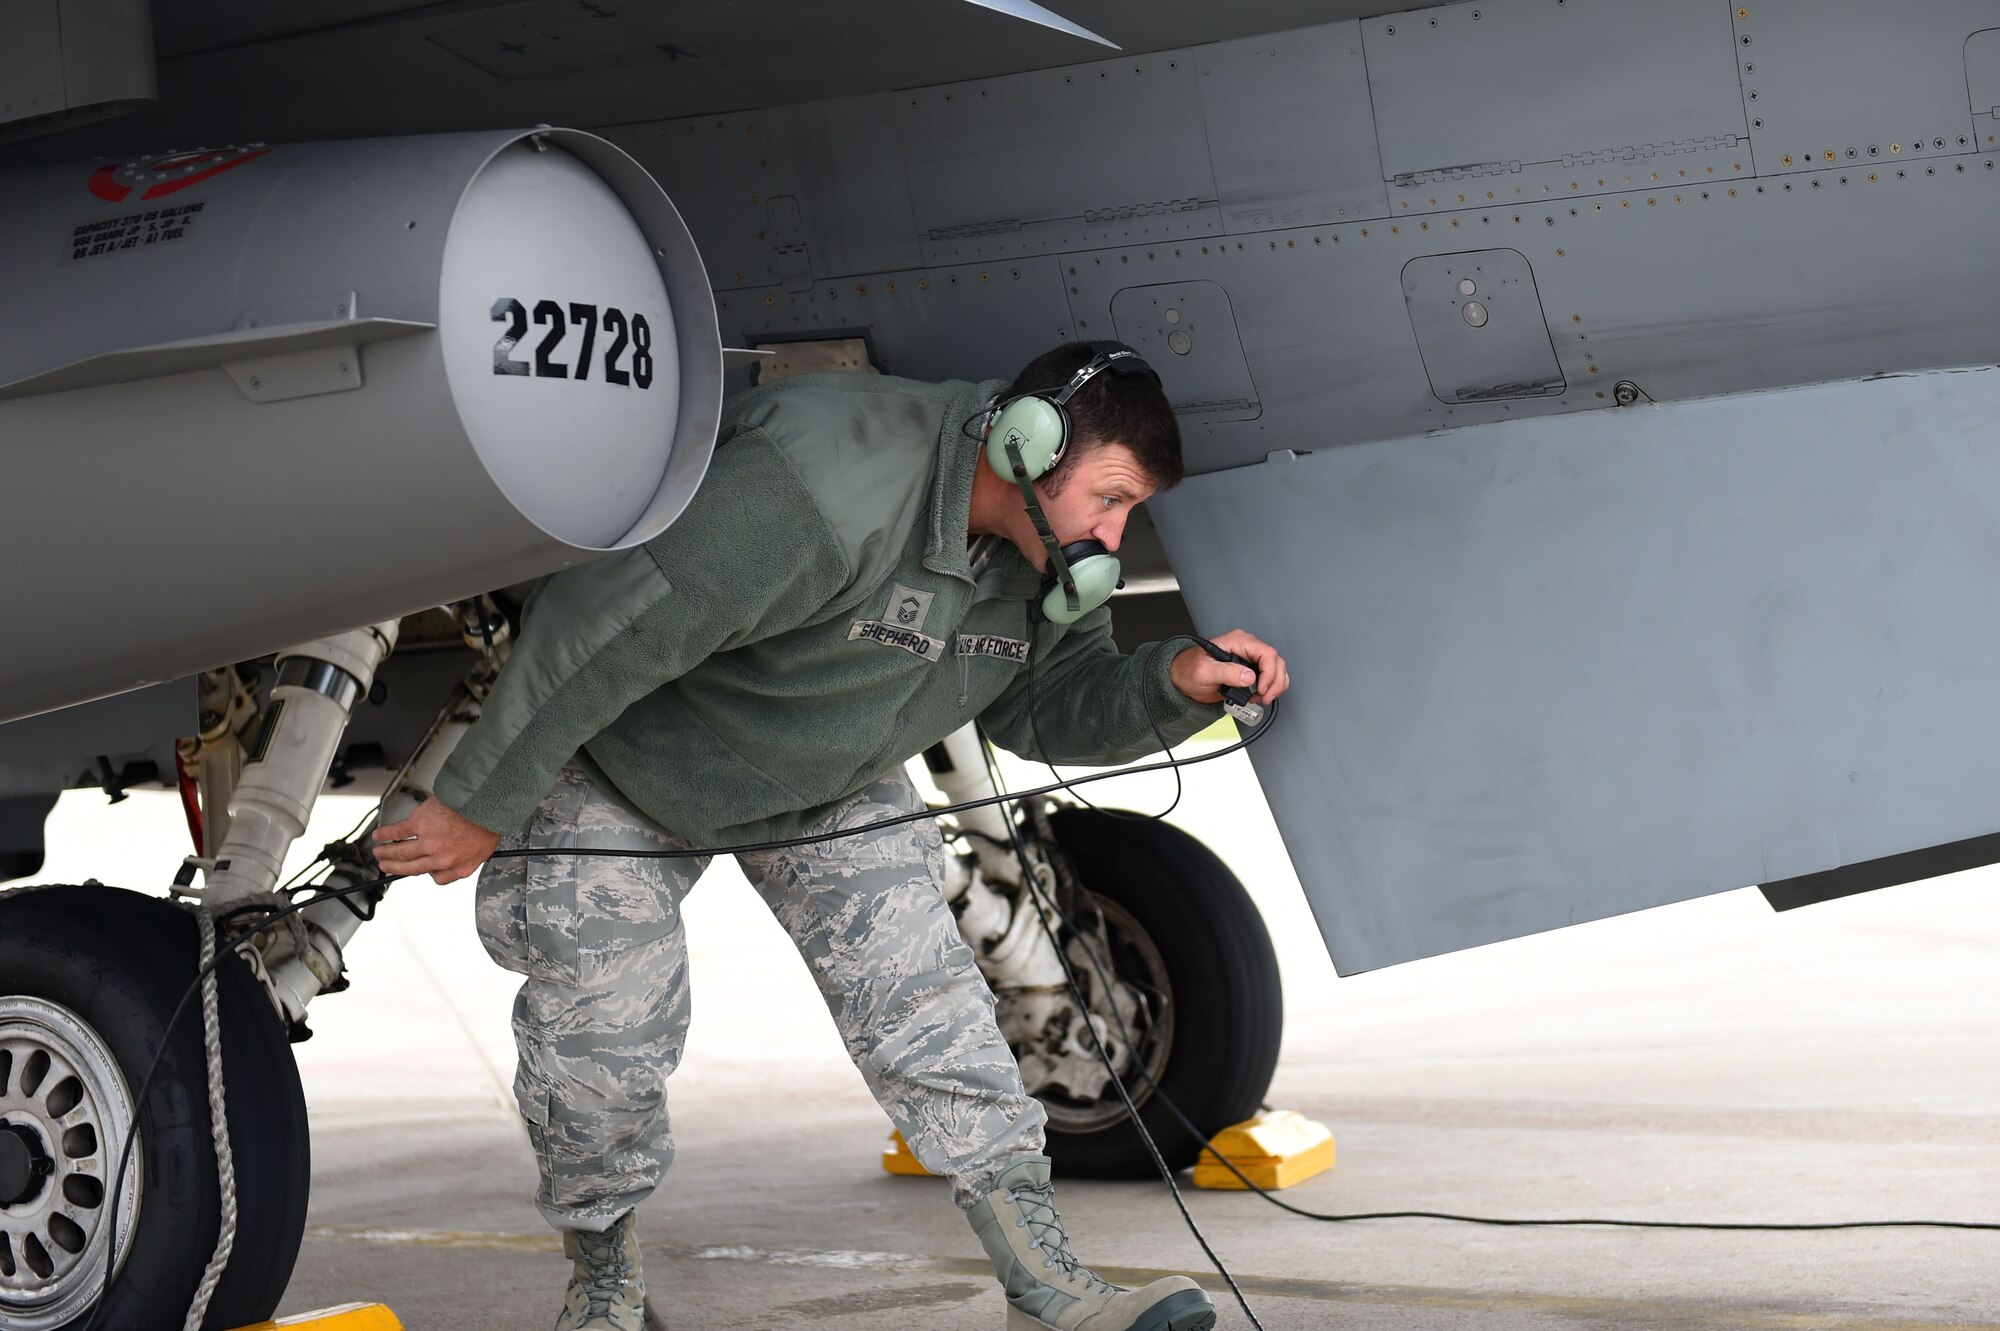 Senior Master Sgt. Robert Shepherd, 132d Wing Public Affairs superintdent and transient alert volunteer, performs a pre-flight check of an F-16c aircraft on May 24, 2017, at the 114th Fighter Wing, Sioux Falls, South Dakota. Shepherd was an F-16 crew chief at the 132d Wing for 16 years before the mission change. (U.S. Air National Guard photo by Tech. Sgt. Nicholas Sirna)